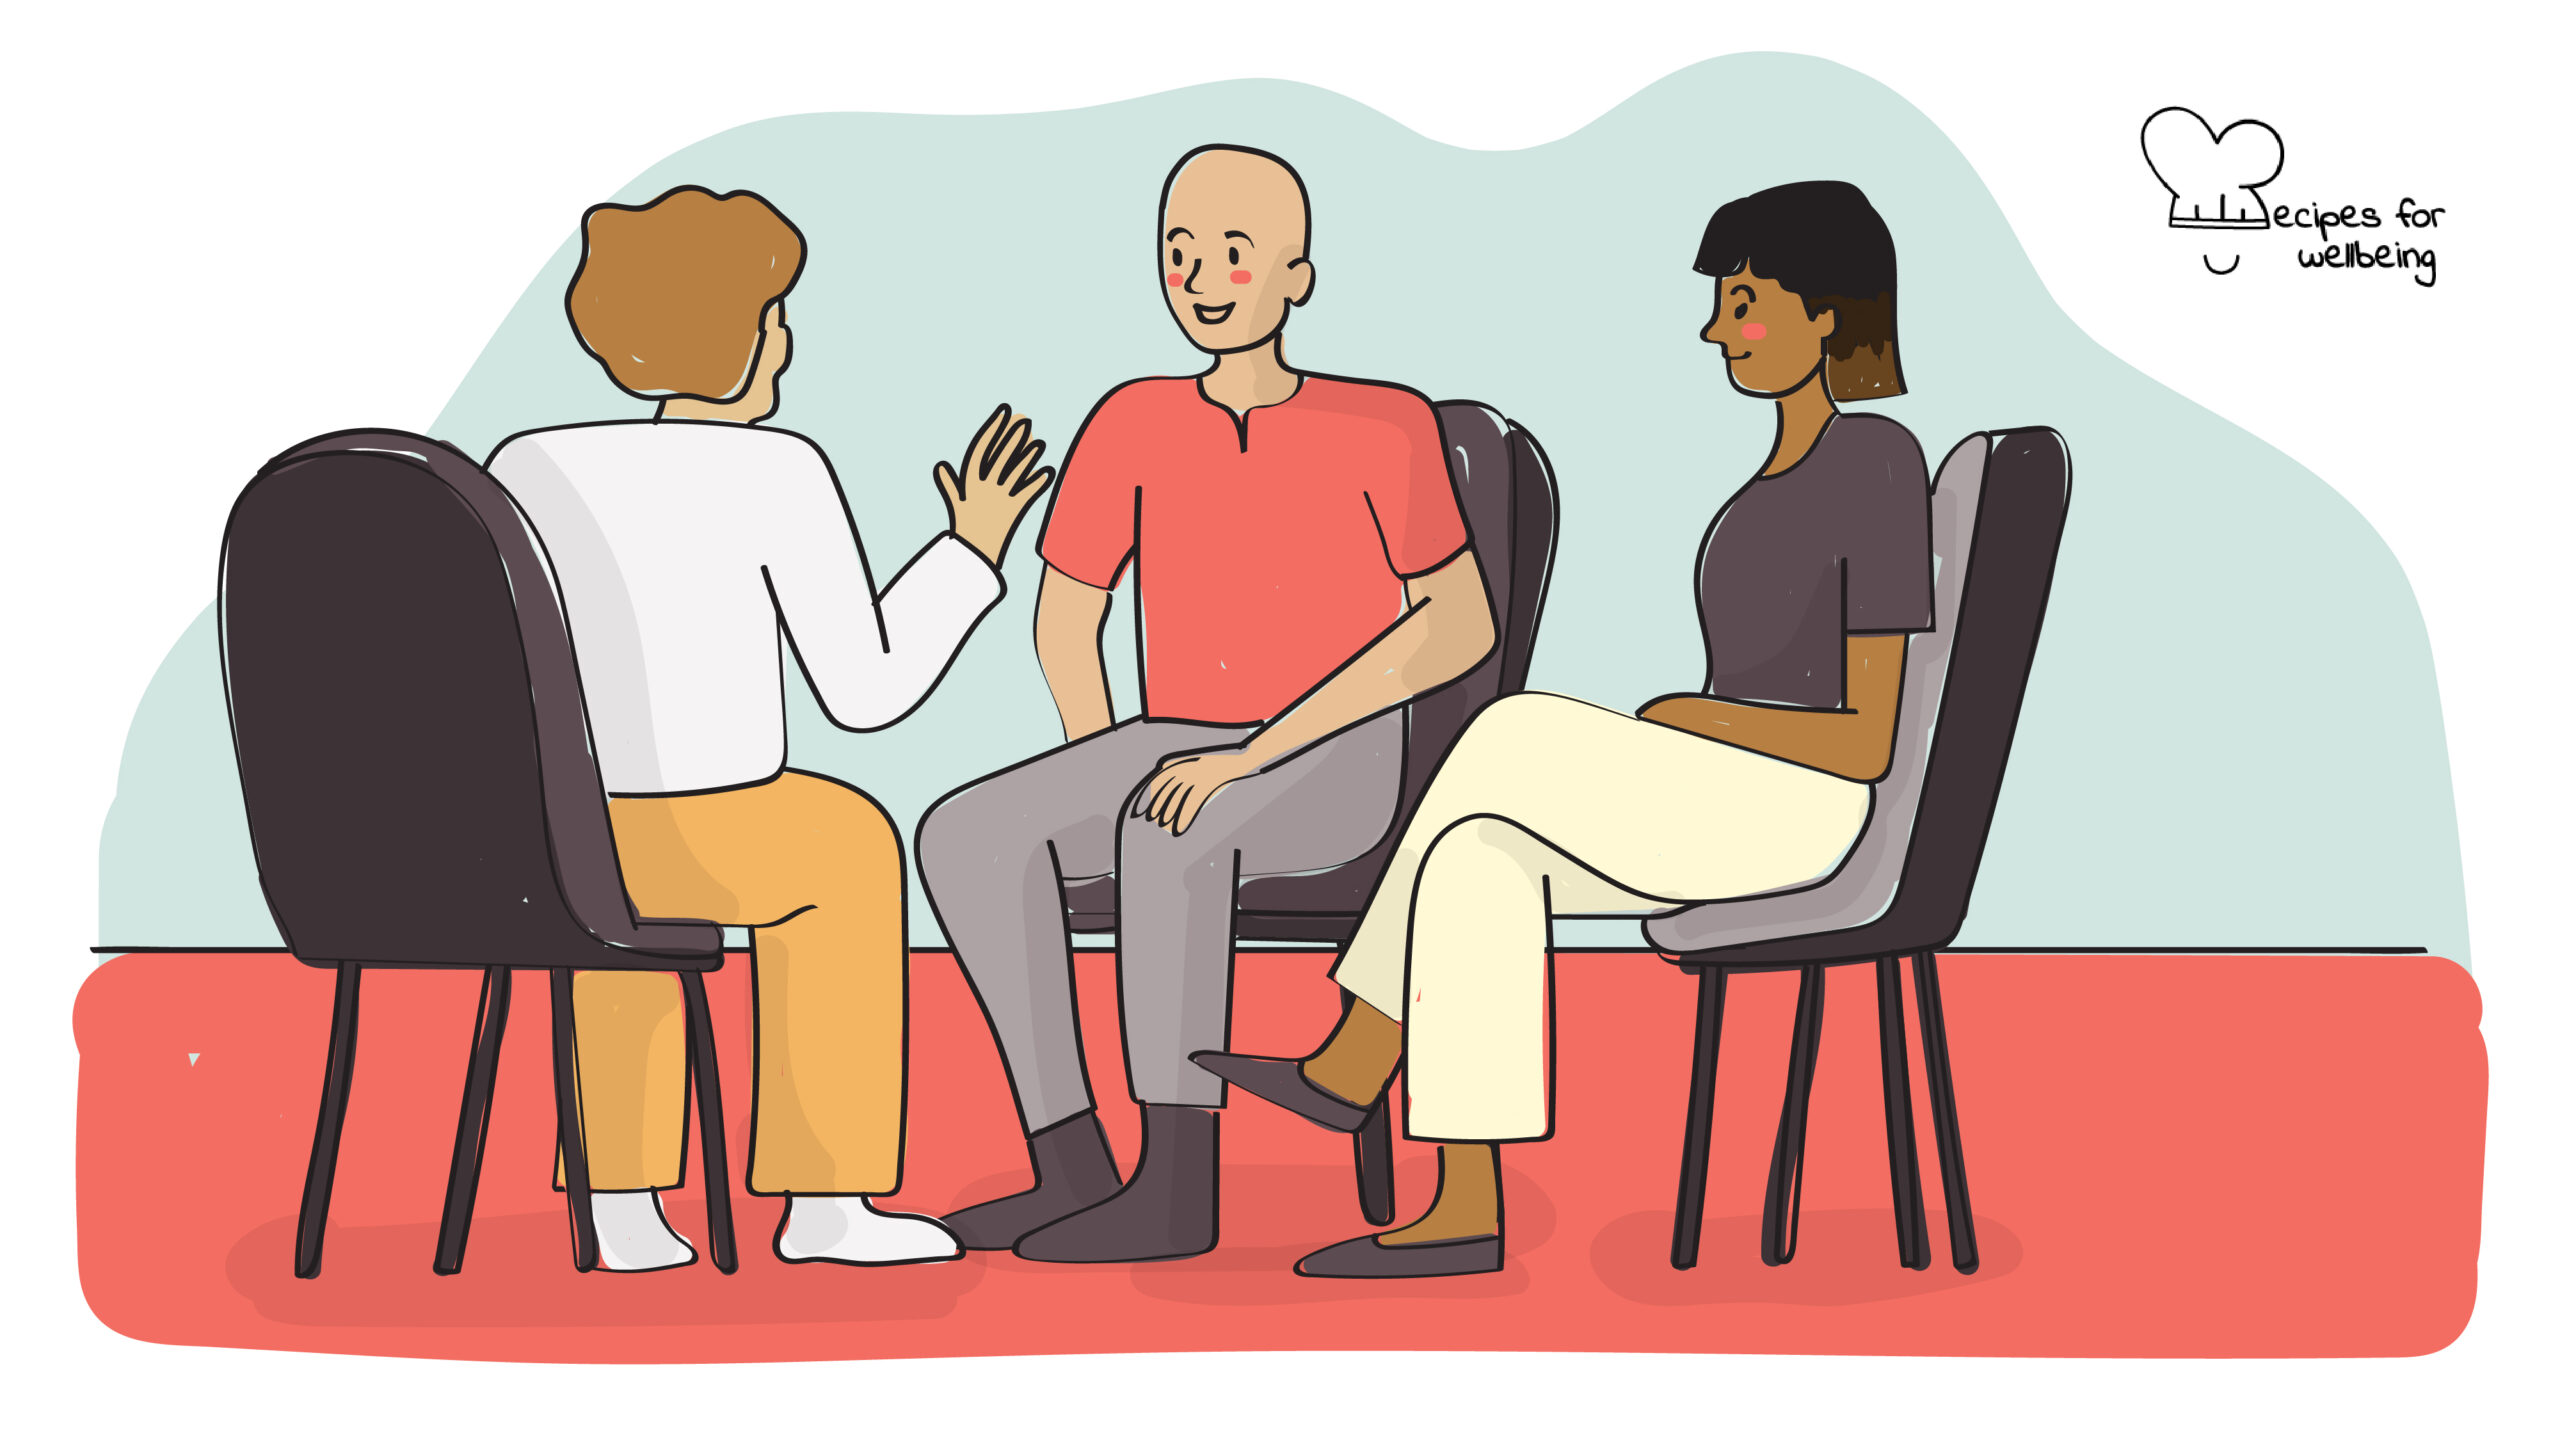 Illustration of 3 people sitting on chairs talking to one another. © Recipes for Wellbeing